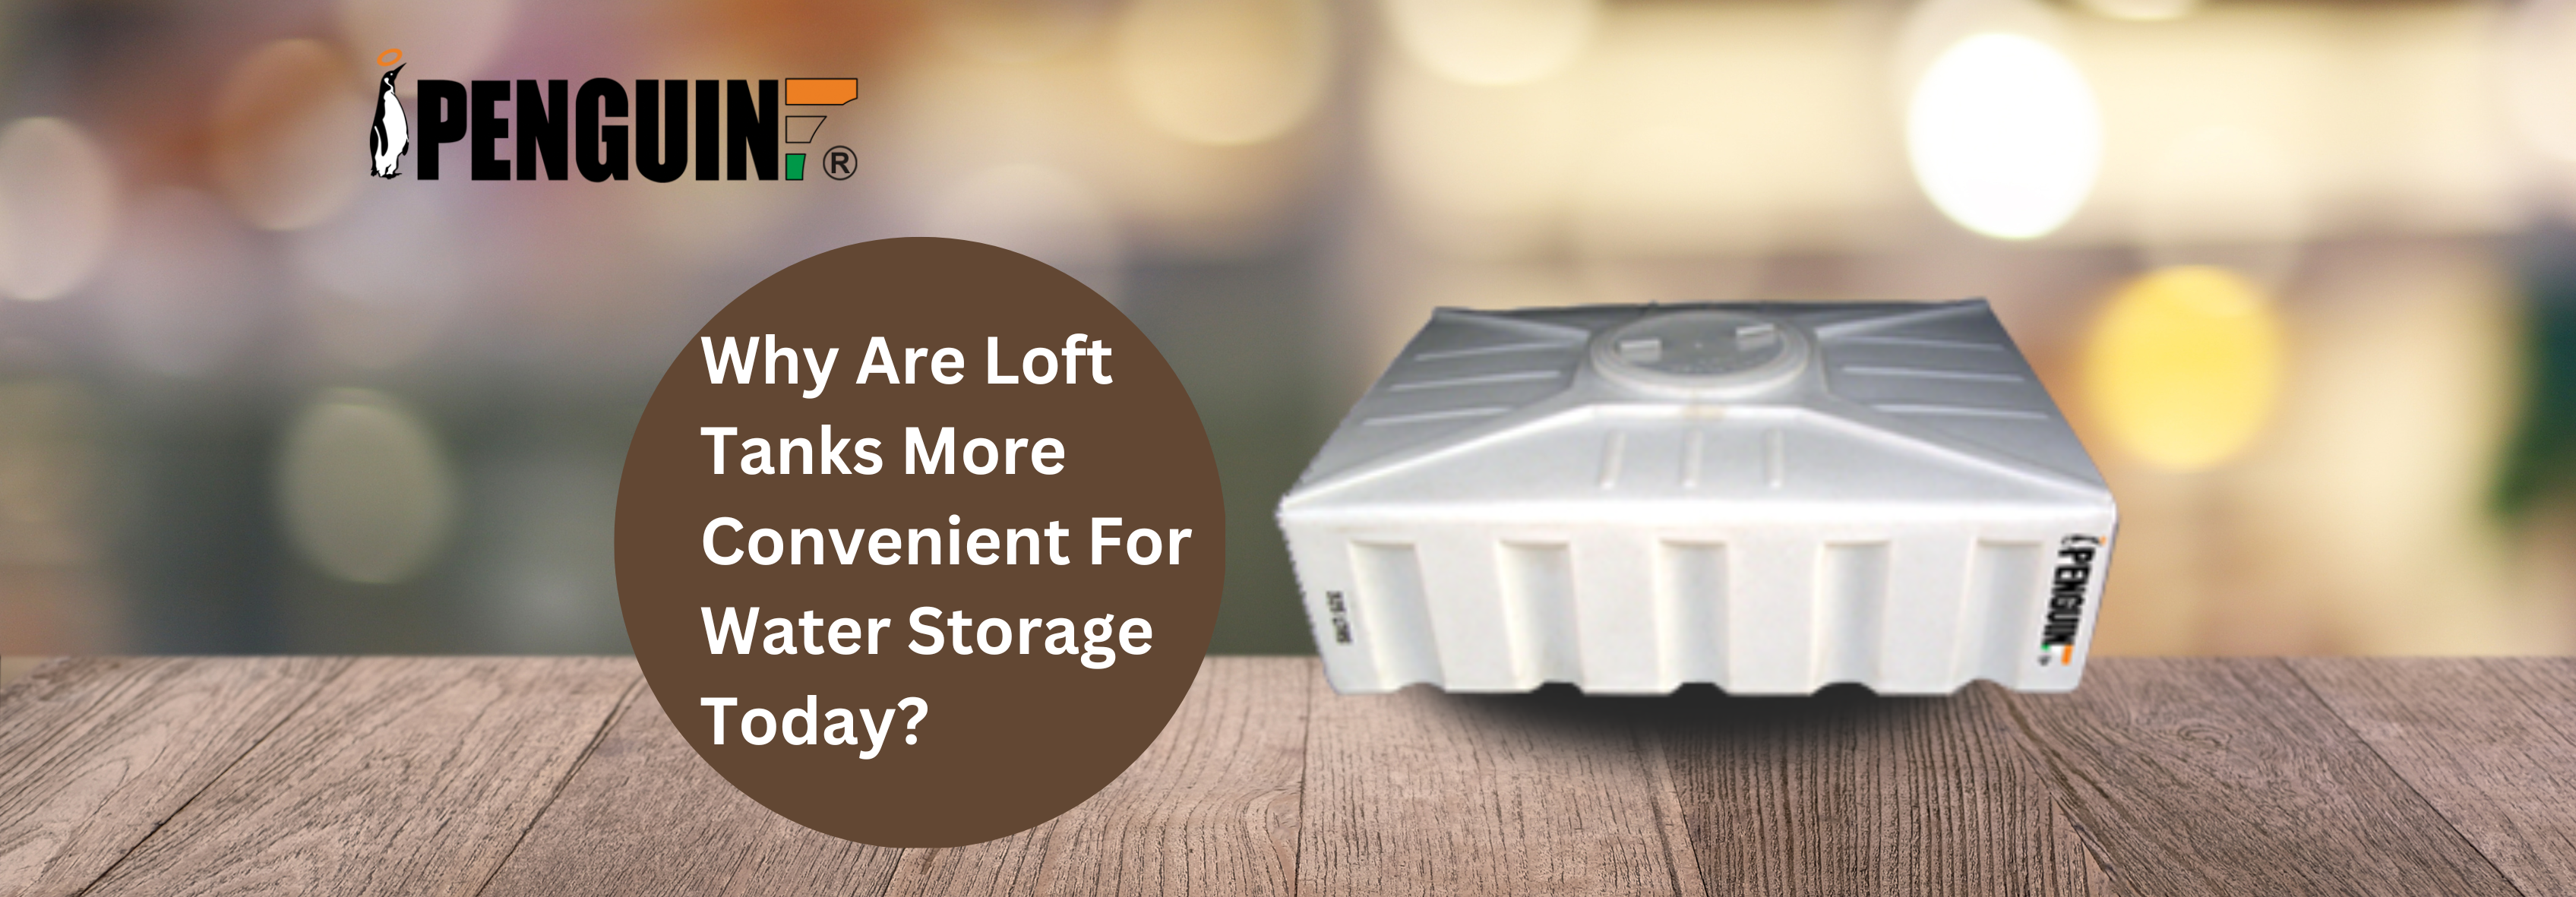 Why are loft tanks more convenient for water storage today?